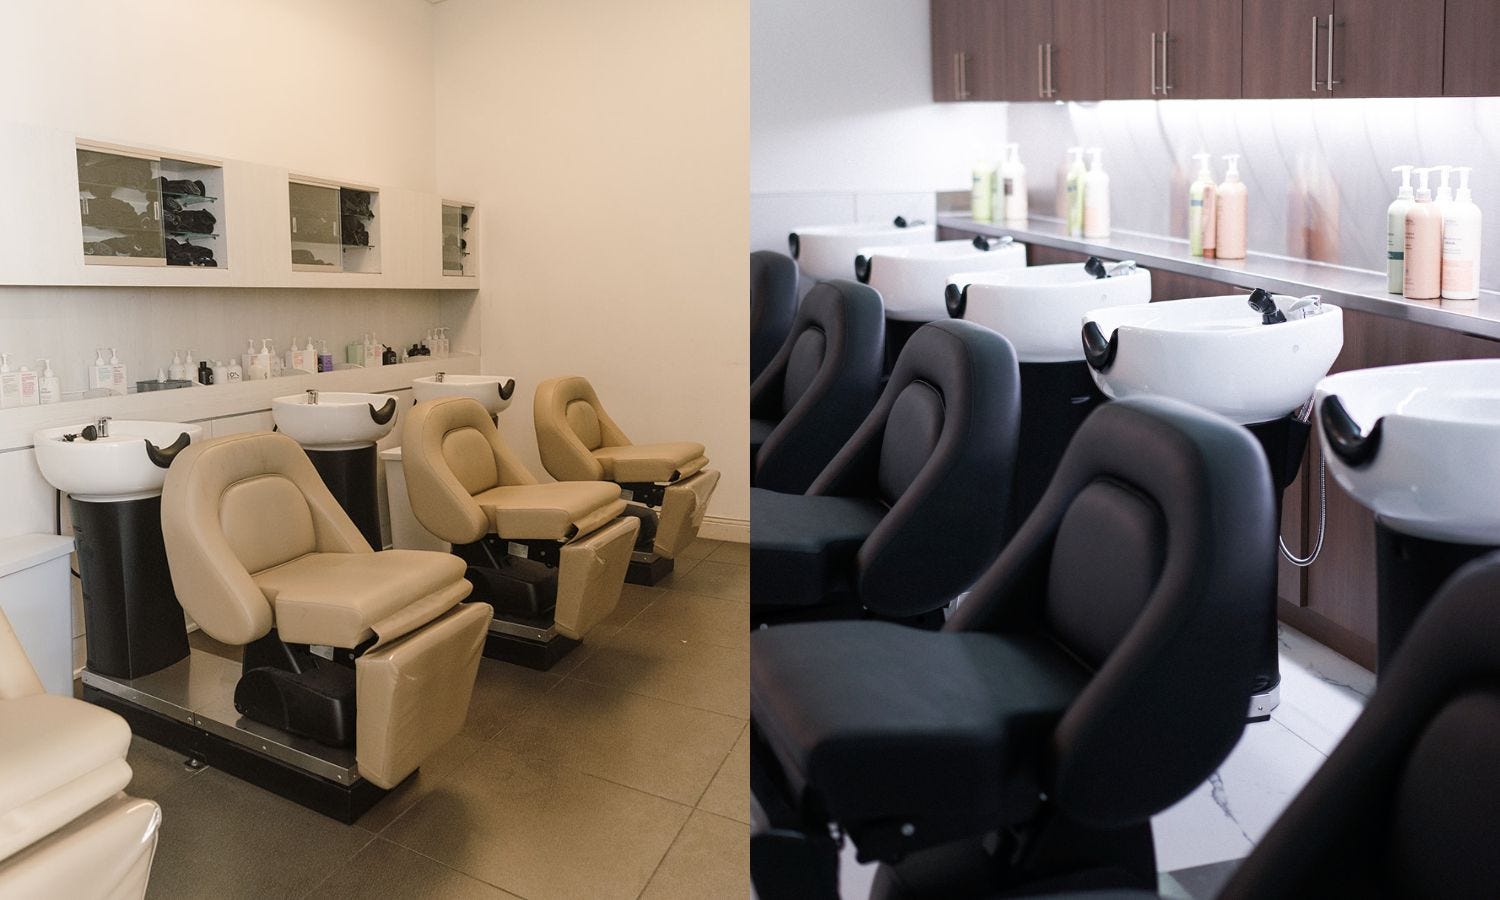 shampoo backwash systems with electric recline controlled by foot pedal